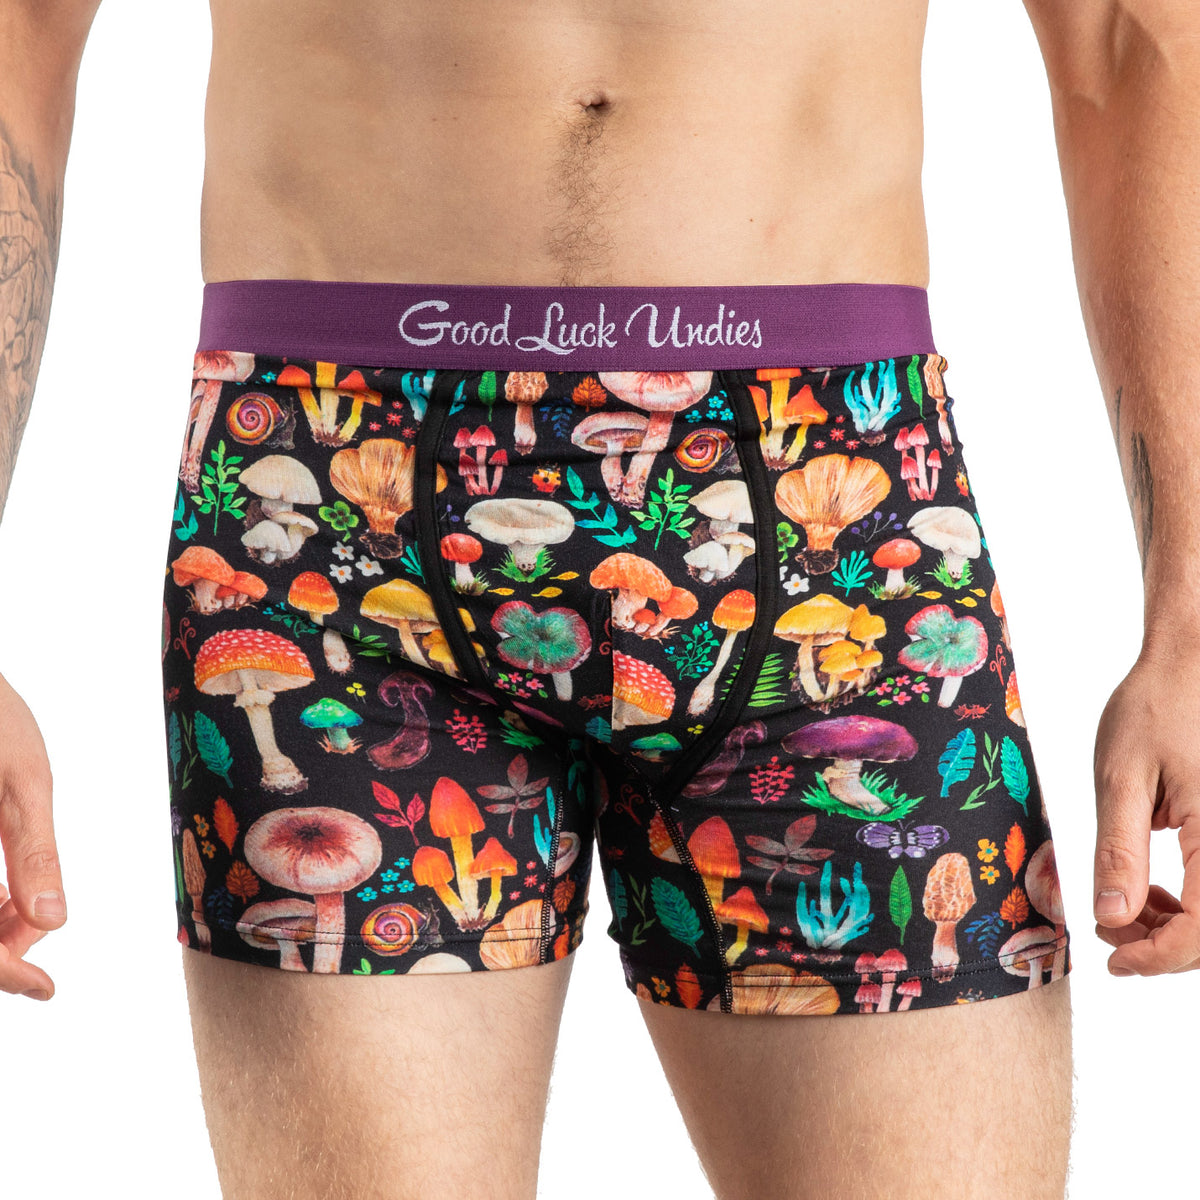 Quit Looking At My Chestnuts - Funny Mens Cotton Trunk Underwear